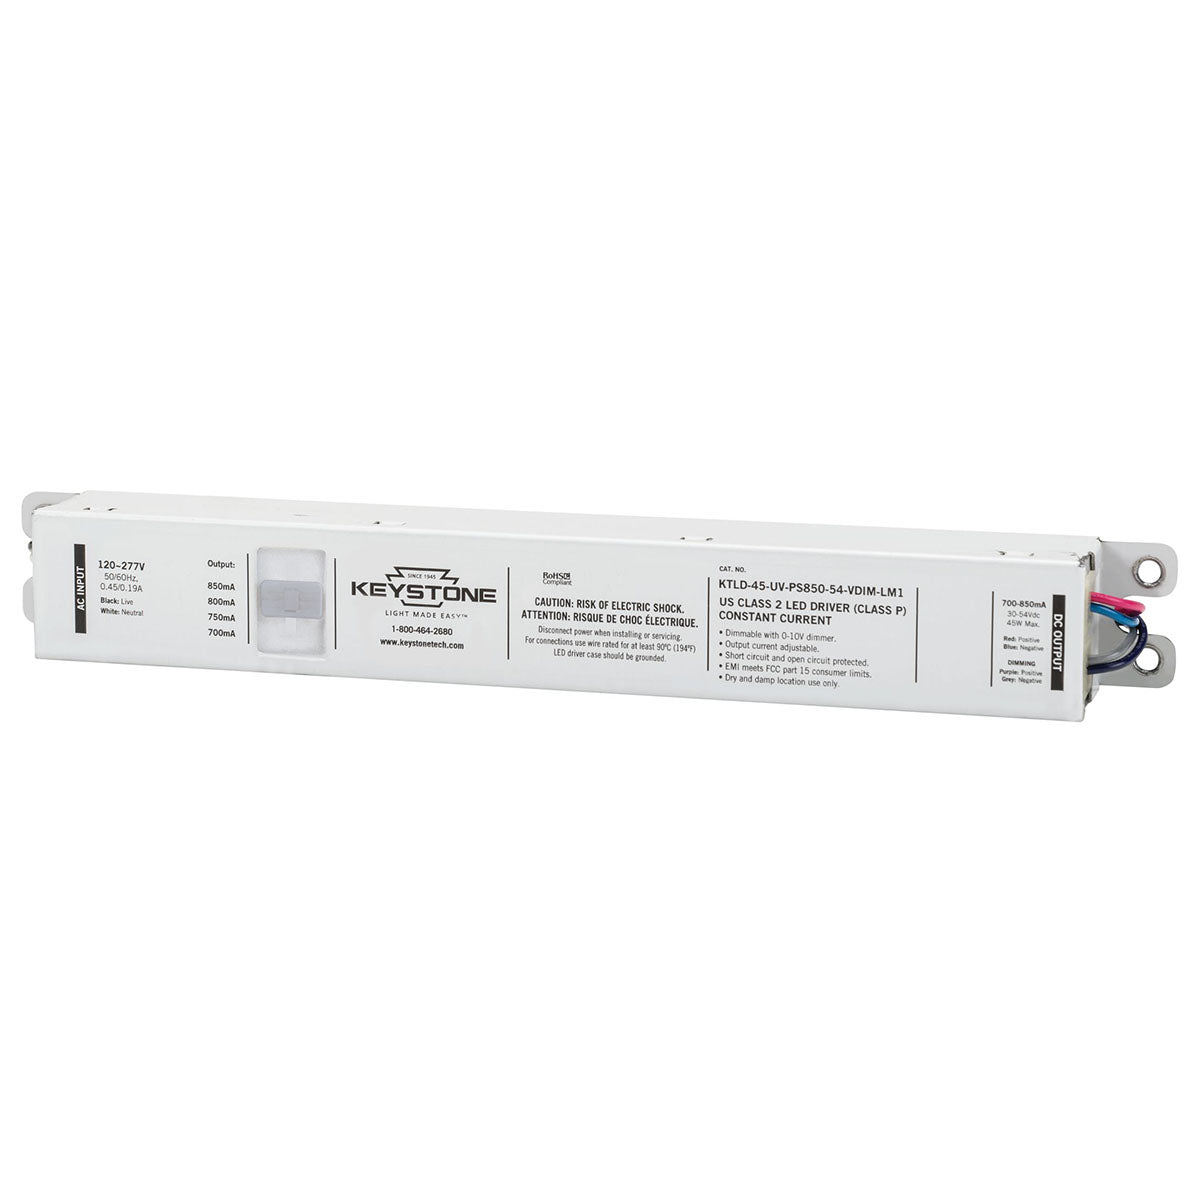 Power Select LED Driver, 45W, Adjustable Constant Current 700-850mA, 0-10V Dimming, 120-277V Input - Bees Lighting